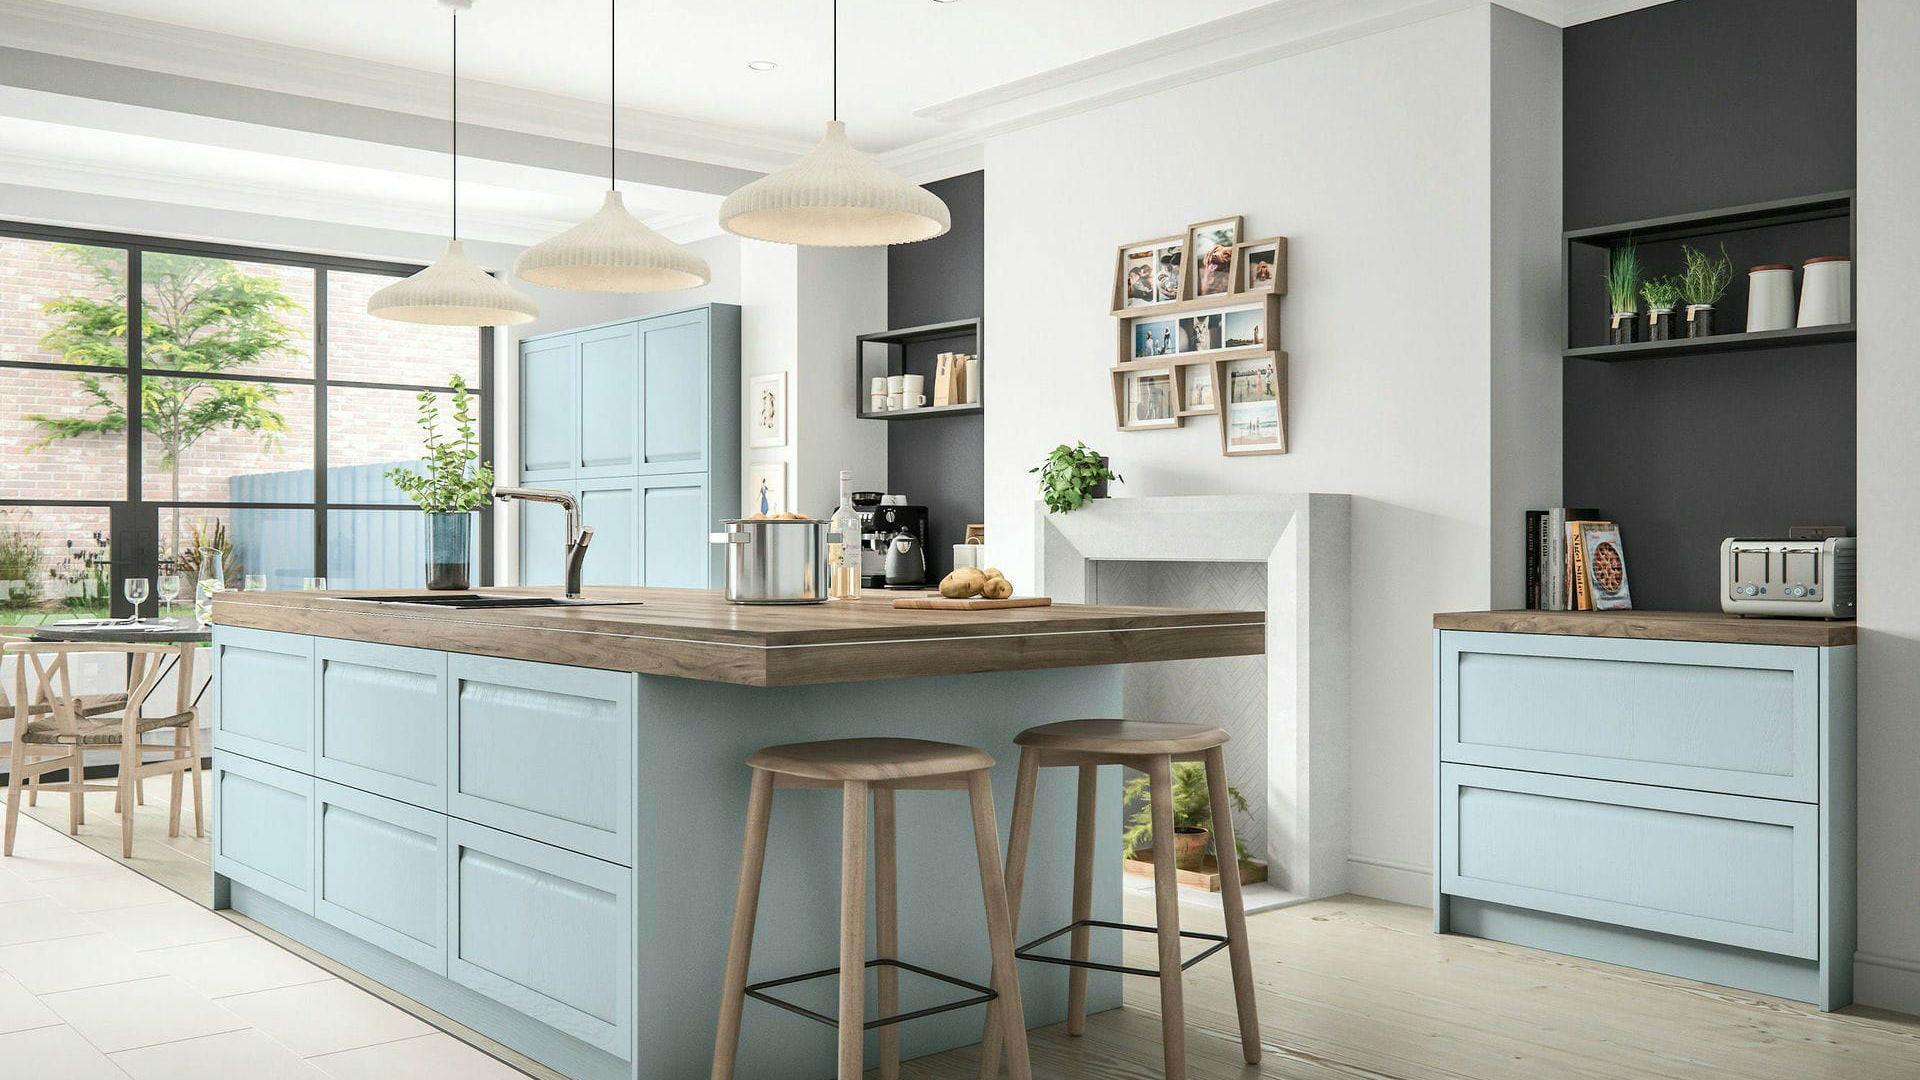 Handleless solid wood Pantry Blue kitchens offering a sleek, contemporary look with a charming pantry blue hue